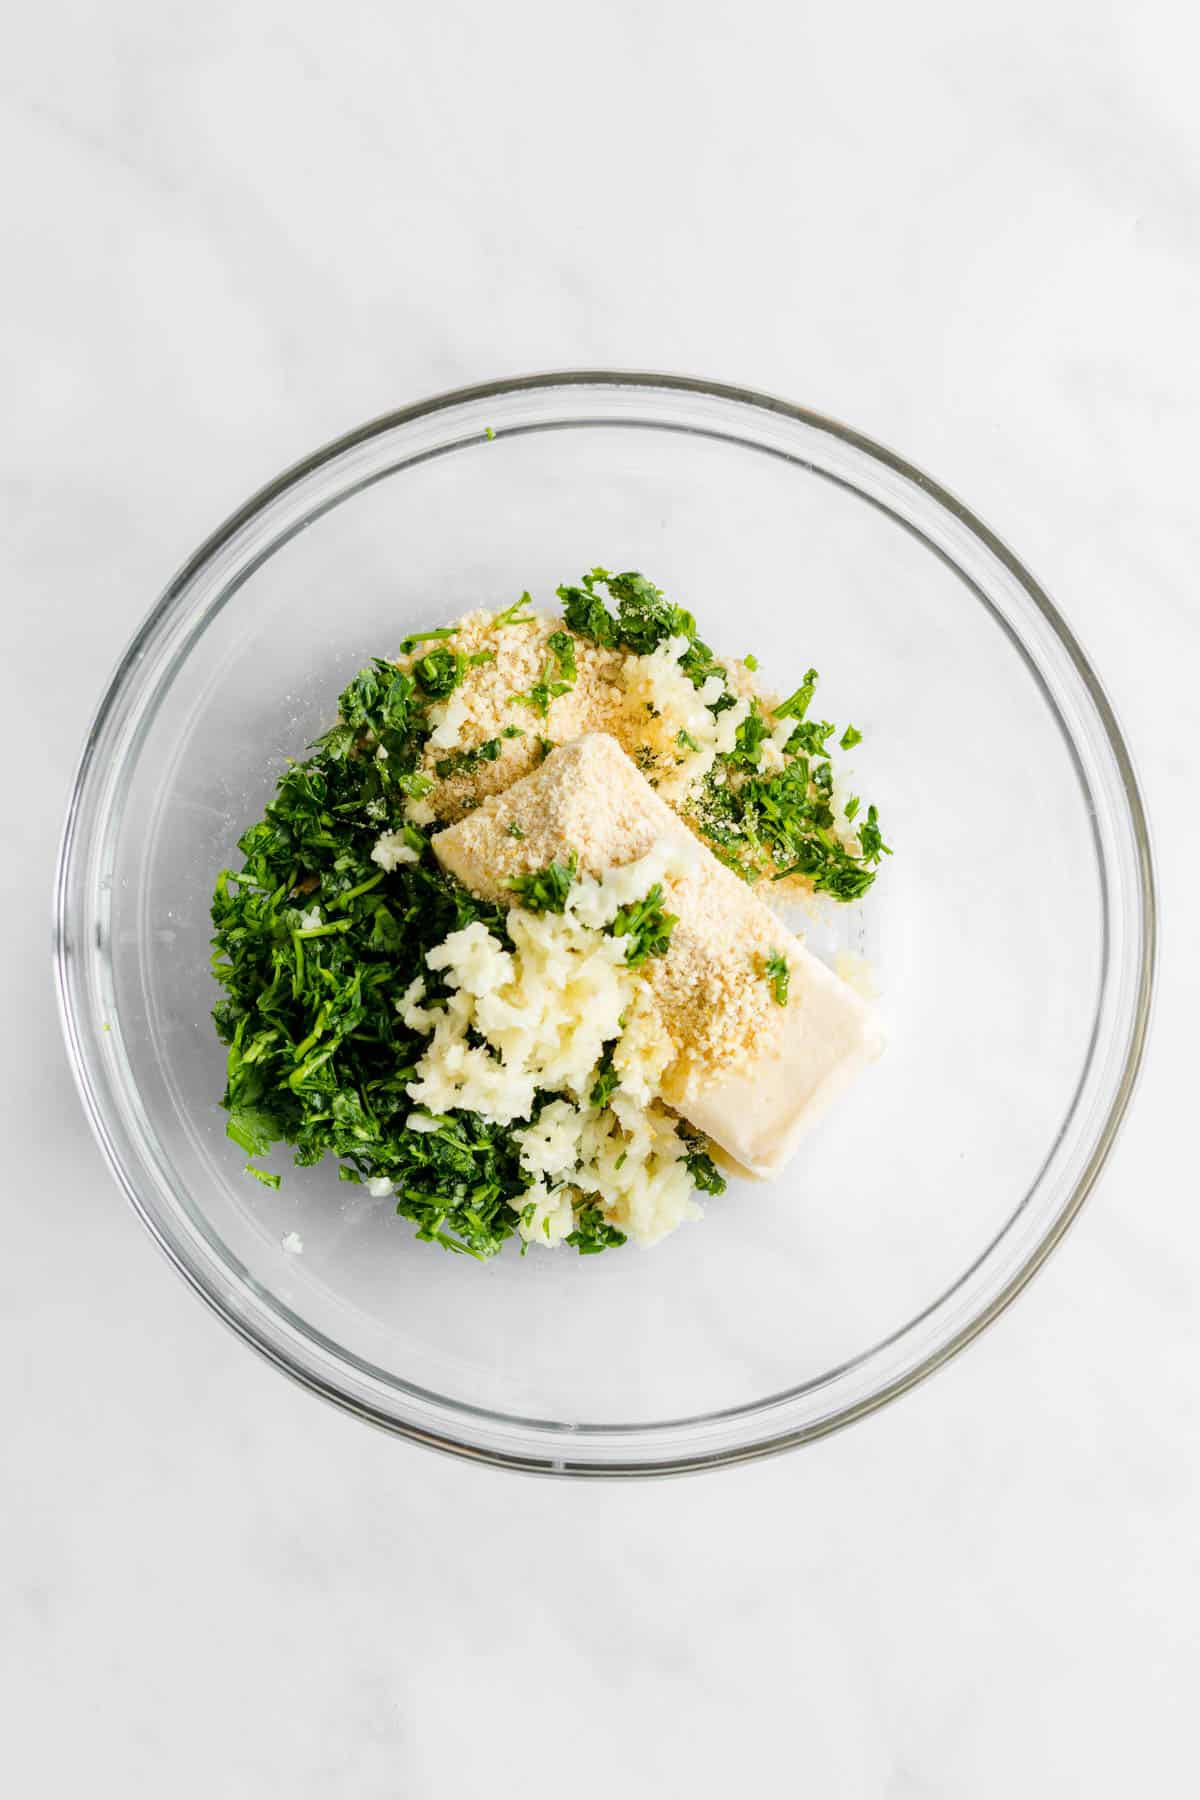 Softened butter, minced garlic, parsley, and vegan parmesan in a glass mixing bowl.